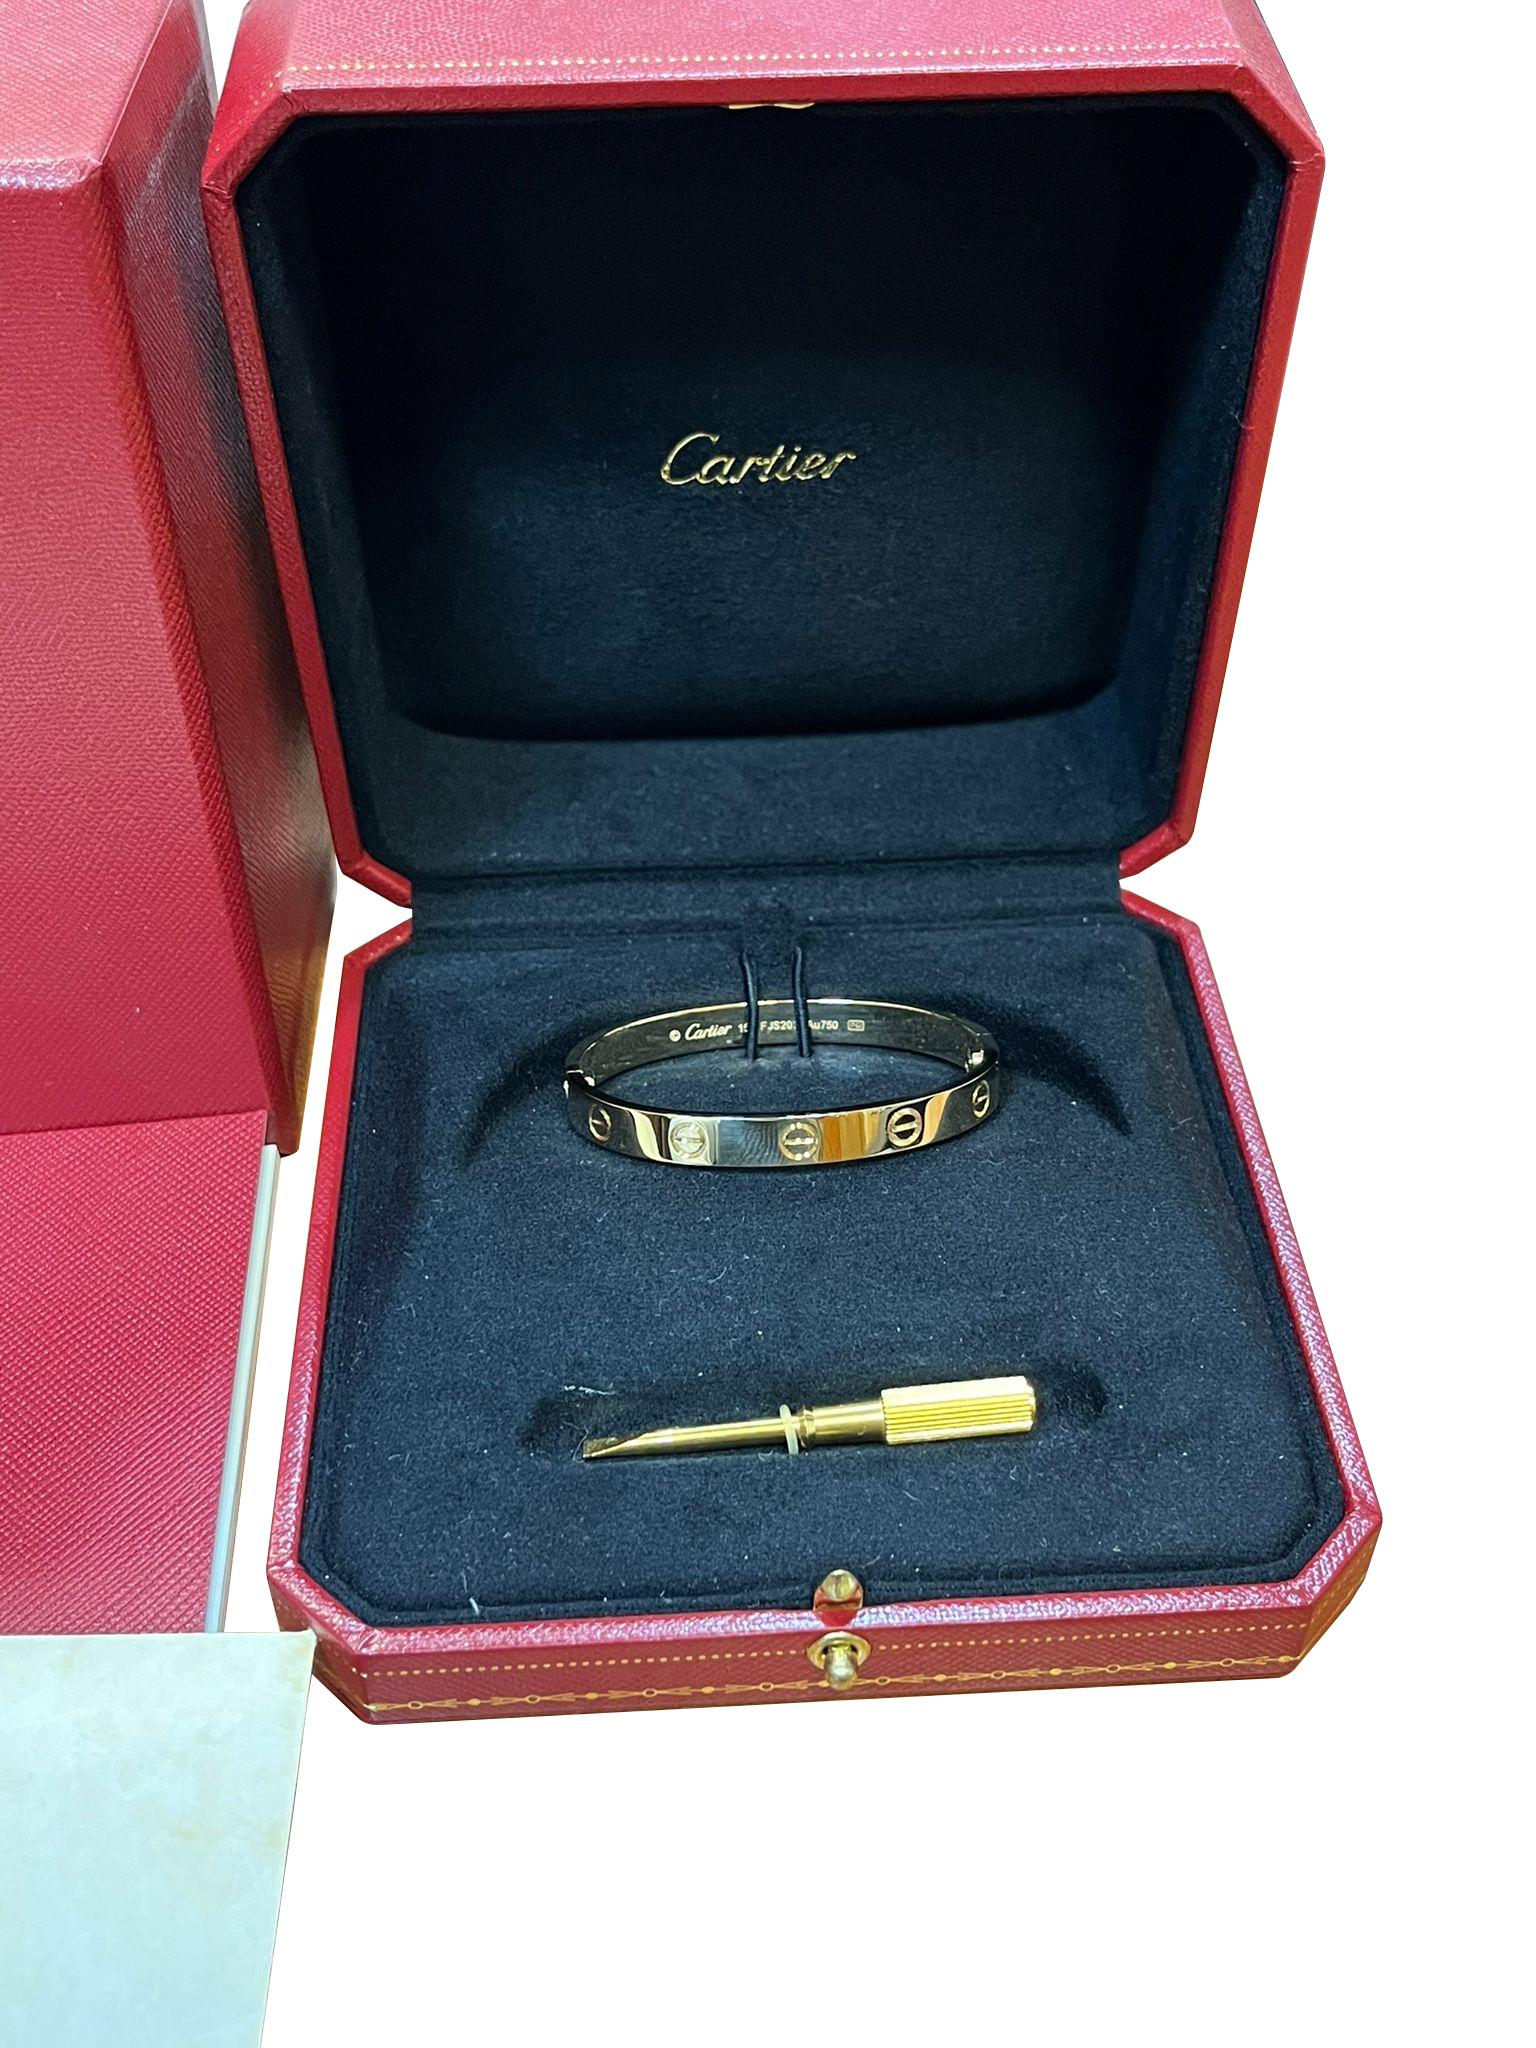 Cartier Love Bracelet 18K Yellow Gold Size 15 Brushed Finish with Screwdriver For Sale 6